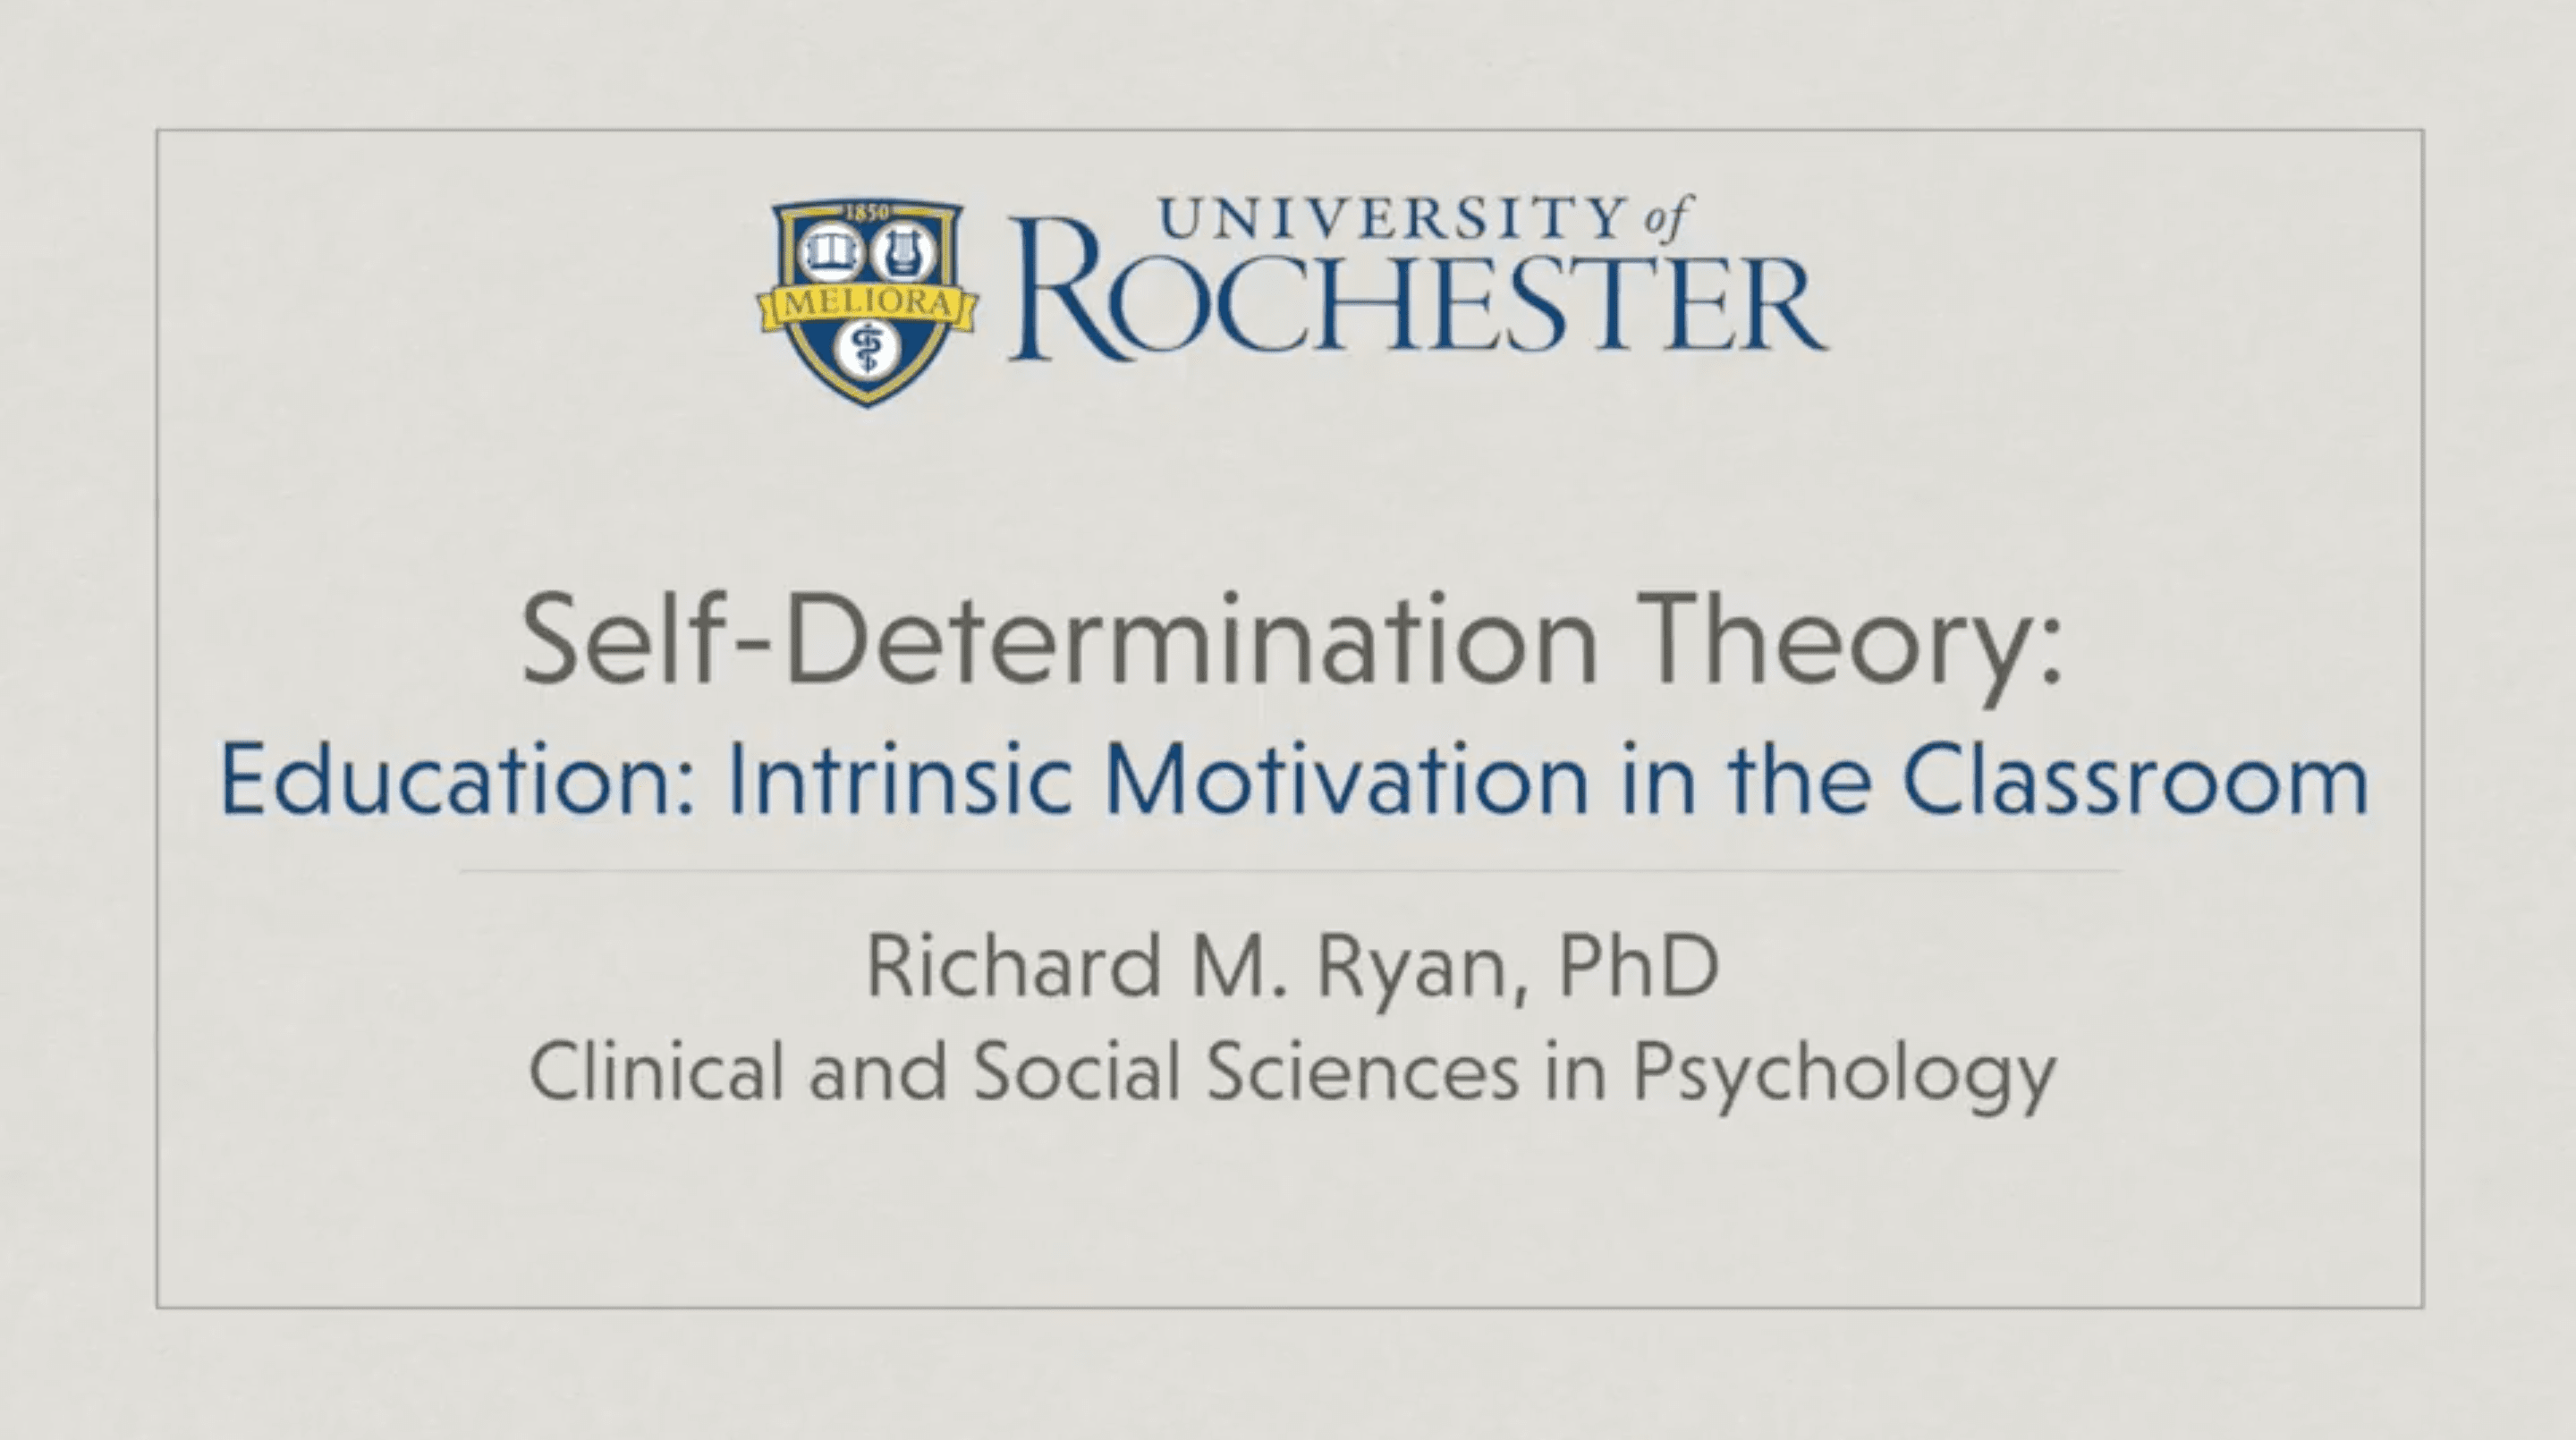 Education Intrinsic Motivation in the Classroom Coursera video with Richard Ryan